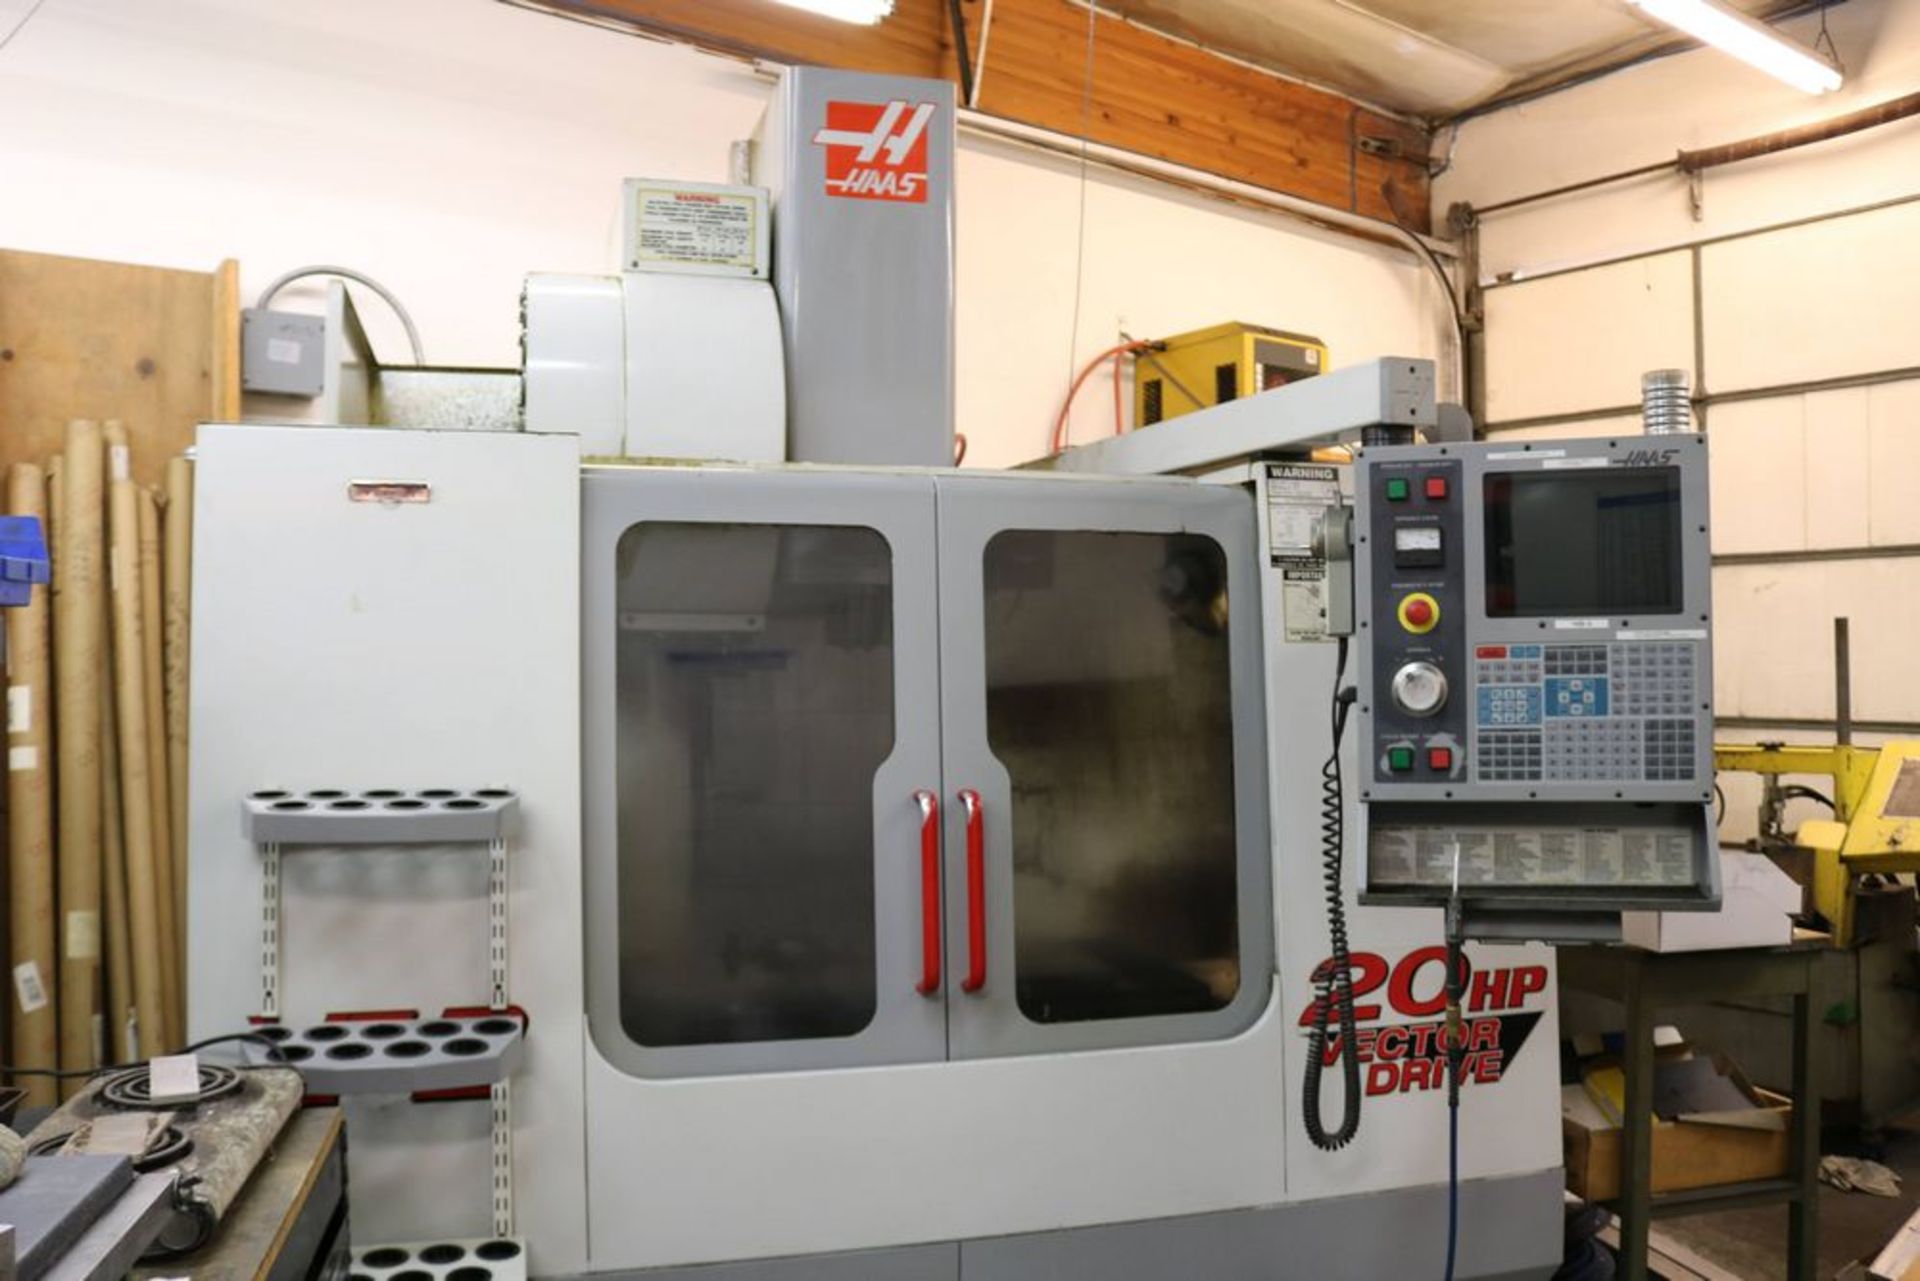 2001 Haas VF-2B - CNC Vertical Machining Center - Image 10 of 11